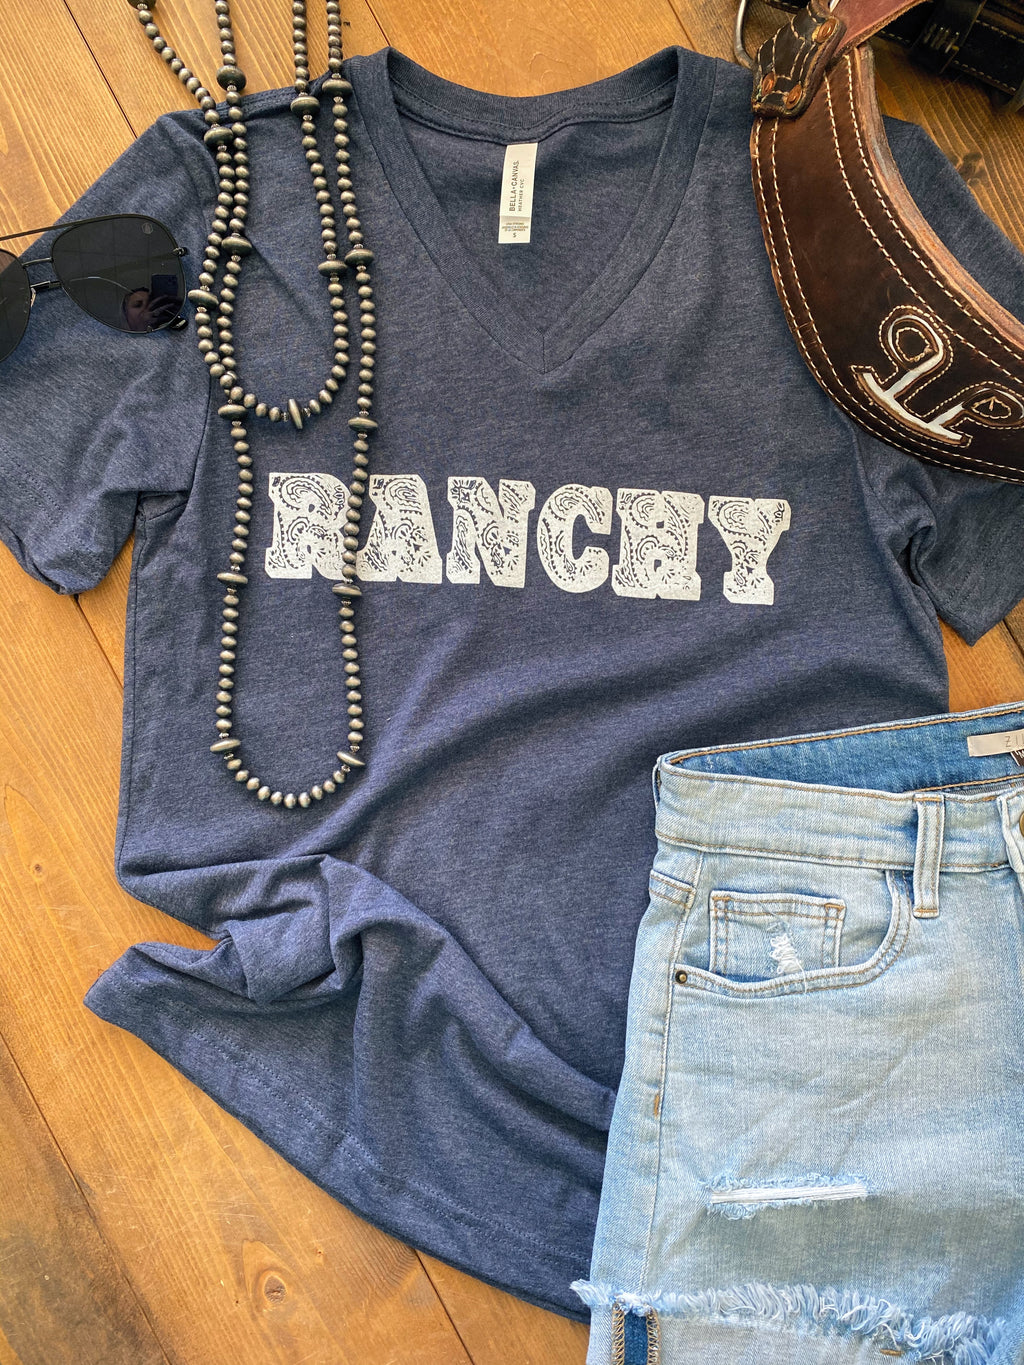 Ranchy Graphic Tee